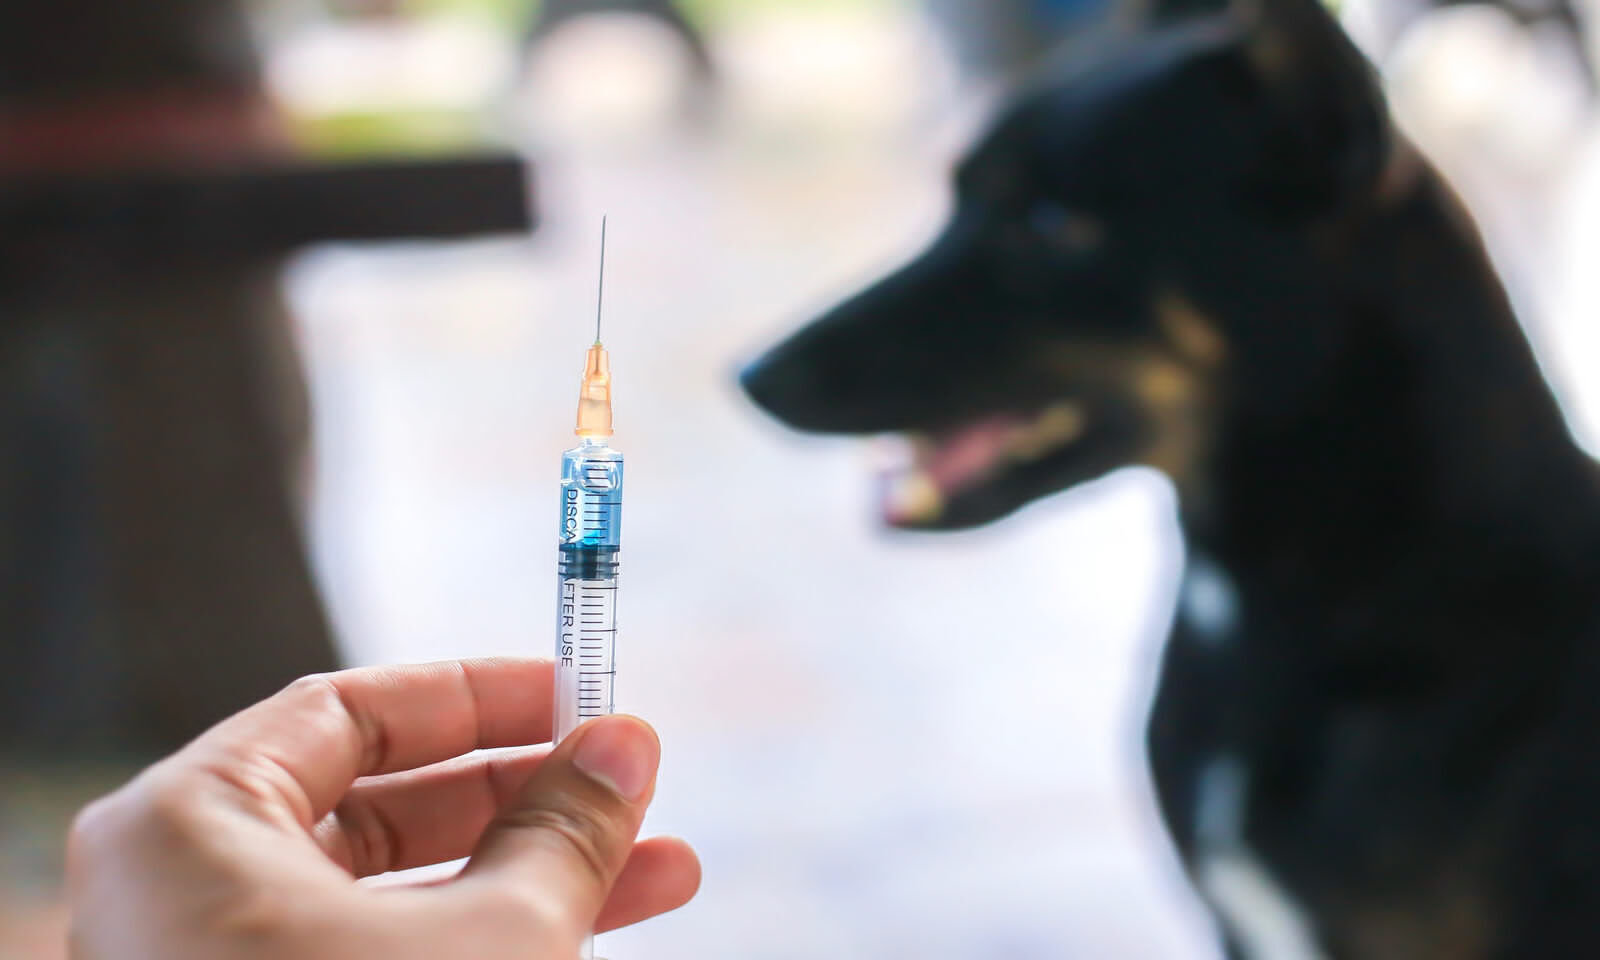 what to do if a vaccinated dog bites you